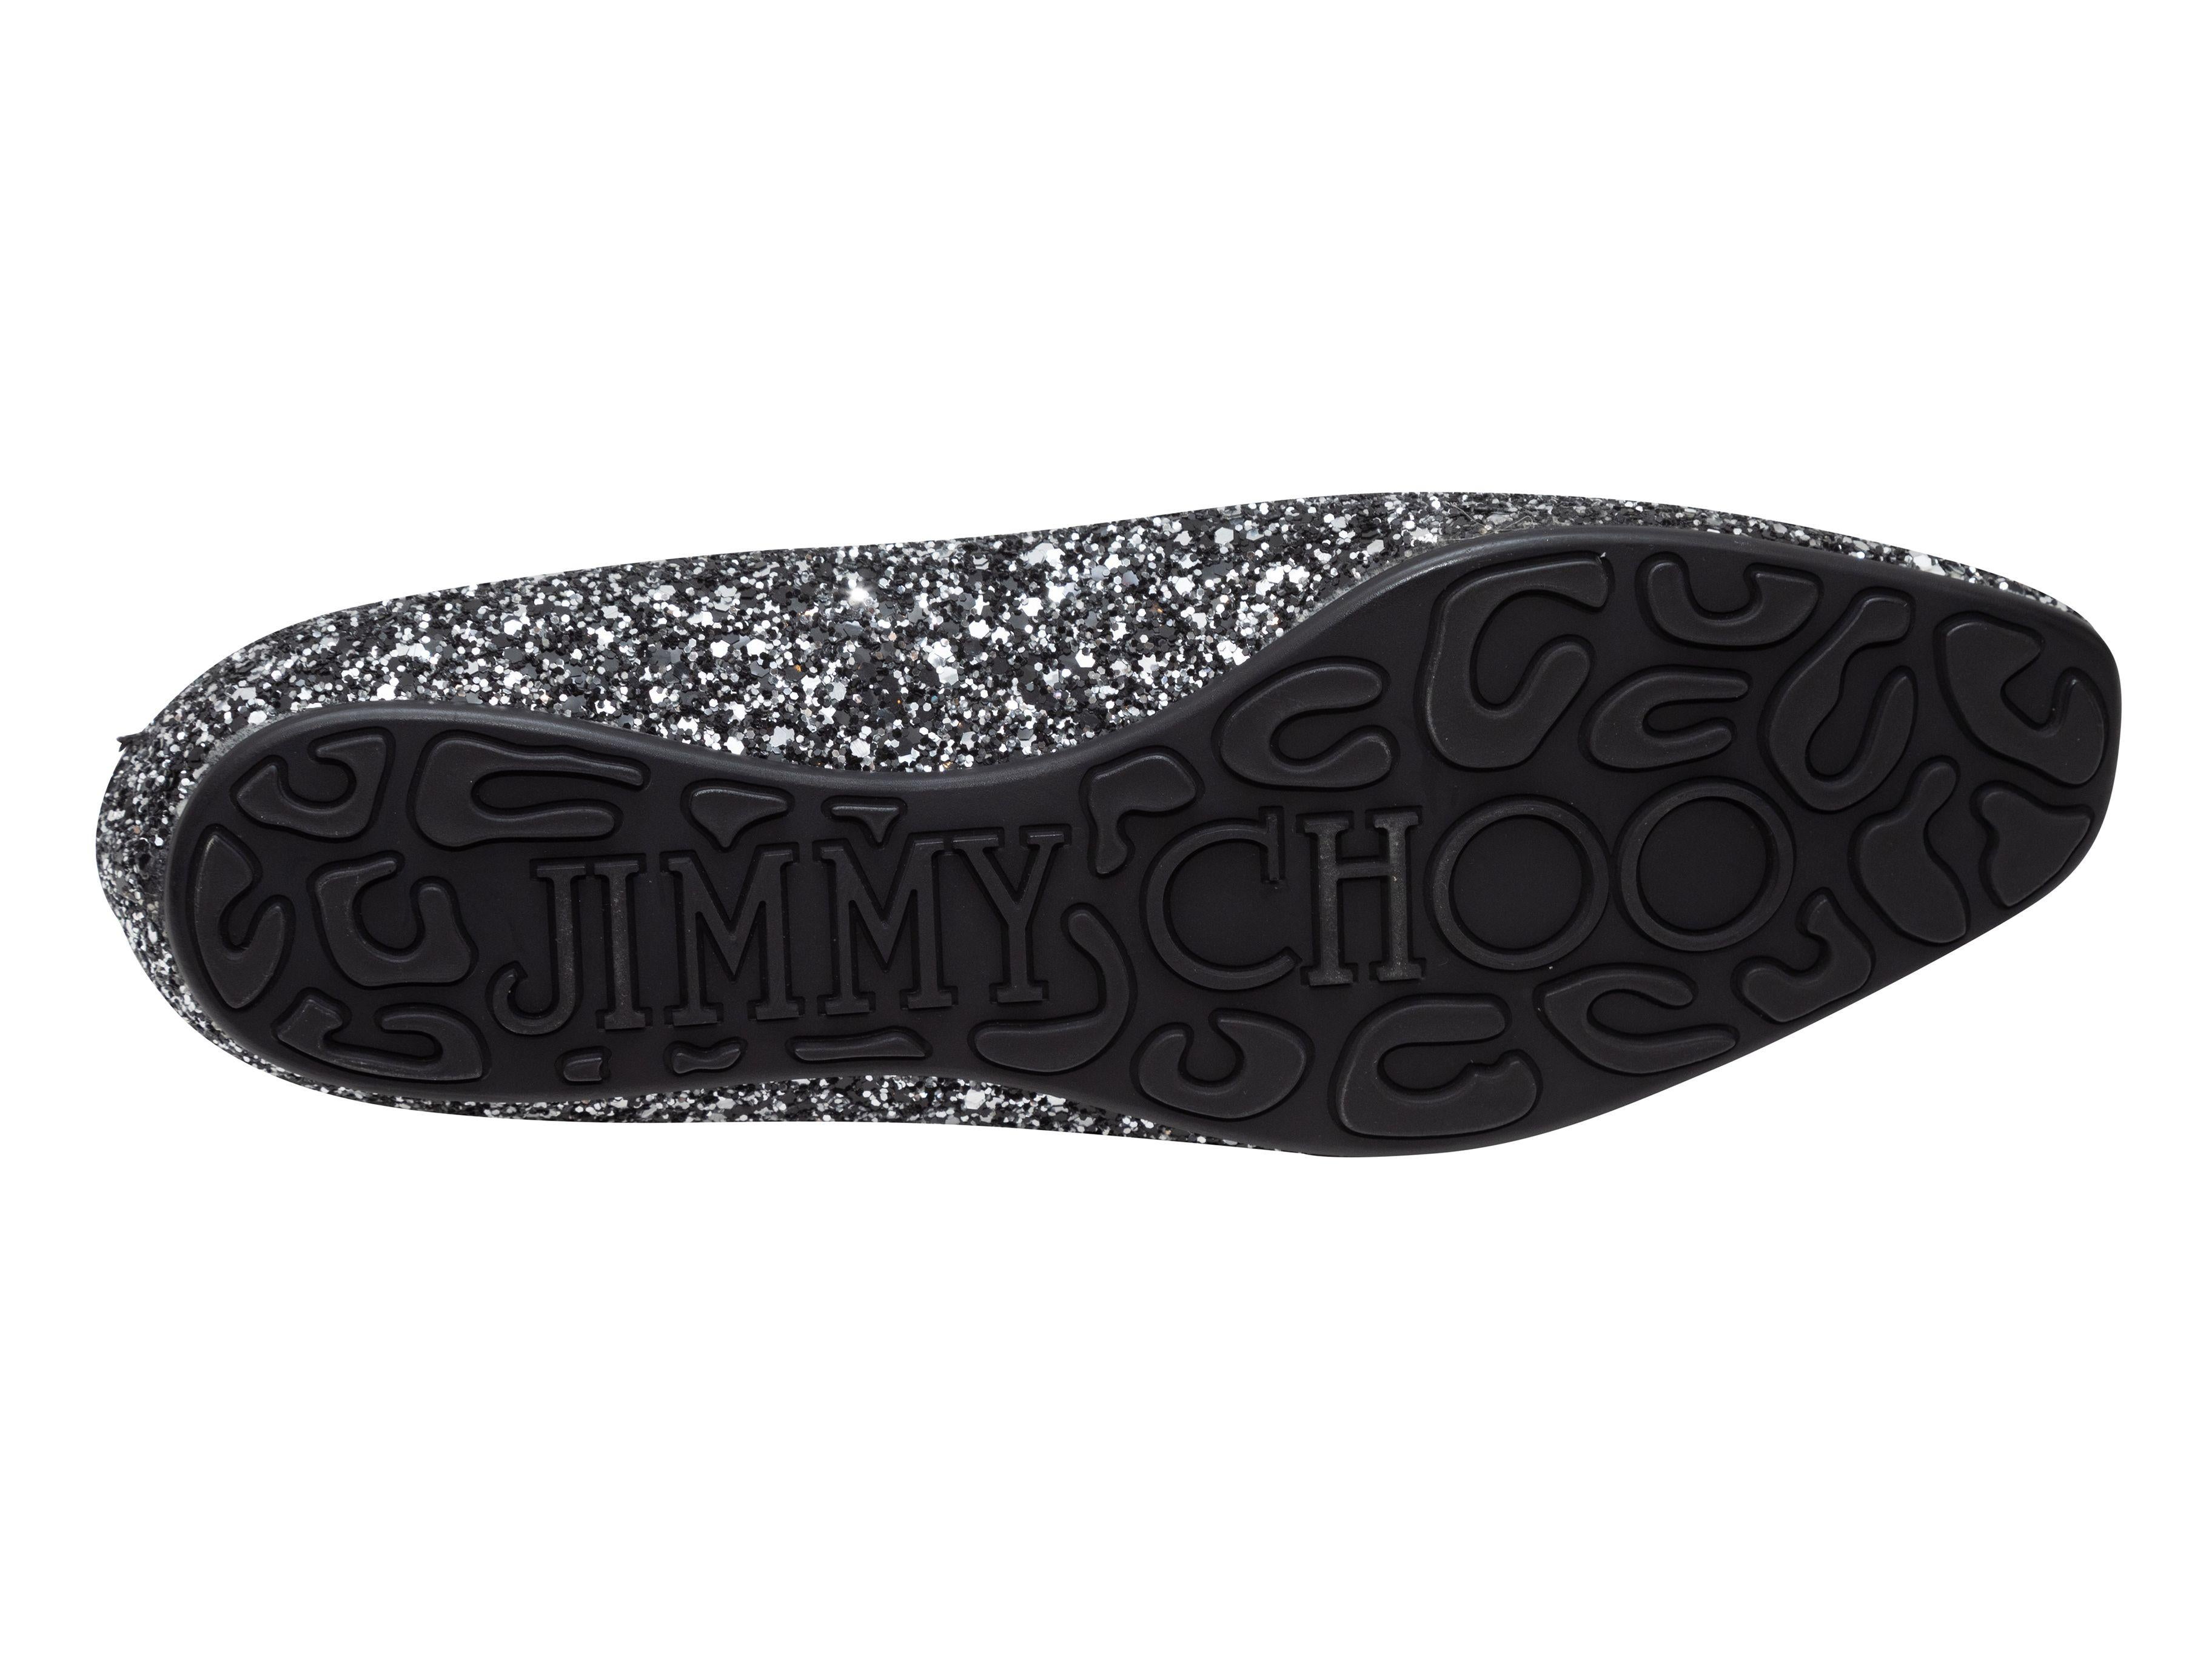 Product Details: Silver and black glitter loafers by Jimmy Choo. Patent leather trim.

Designer Size: 39.5
US Recommended Size: 9.5

Condition: Pre-owned. Very good. Minor signs of wear. Slight loss of shape.